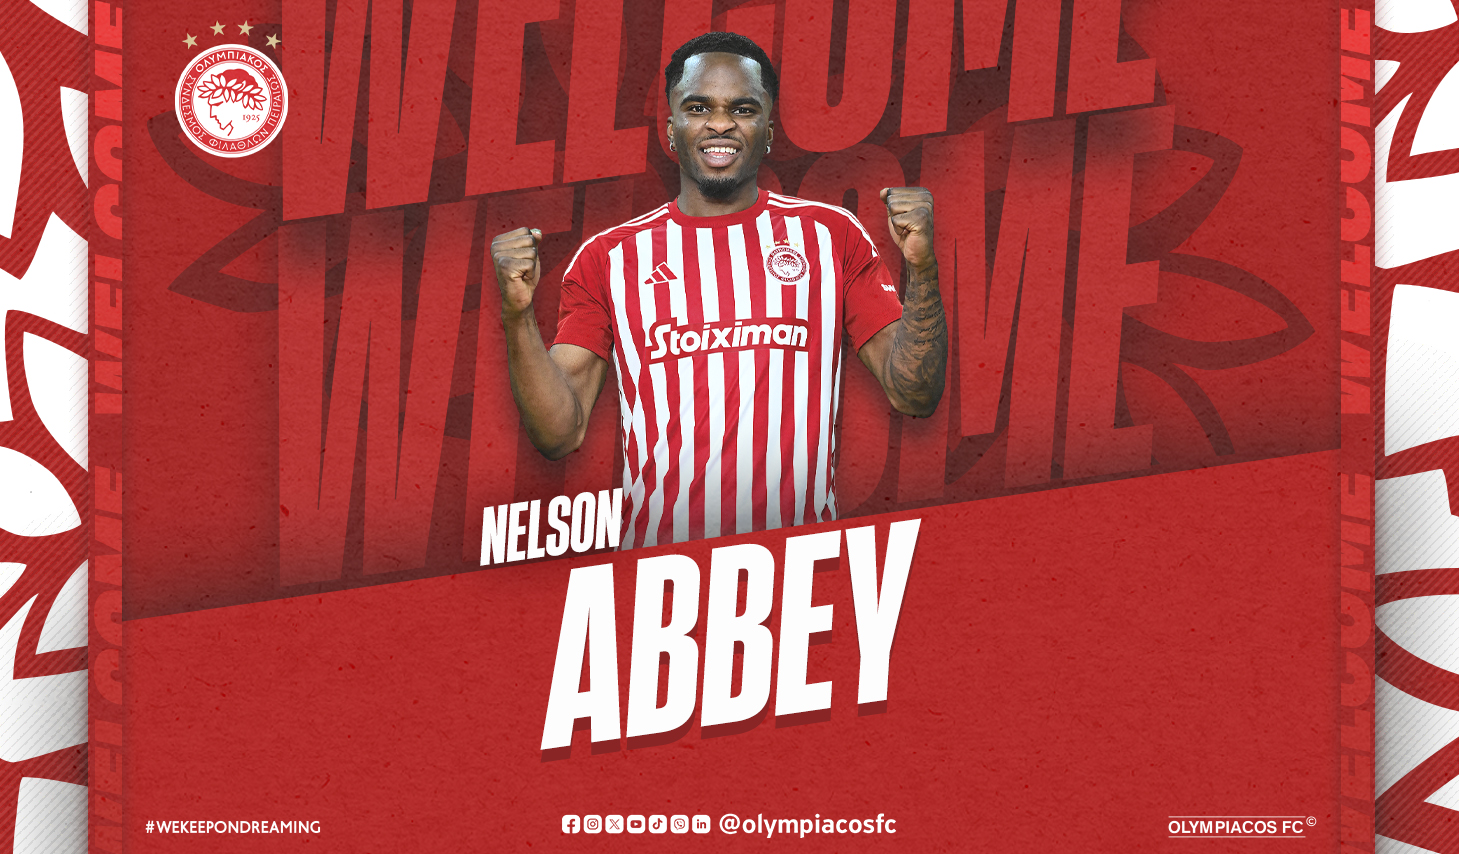 L’Olympiacos signe Nelson Abbey